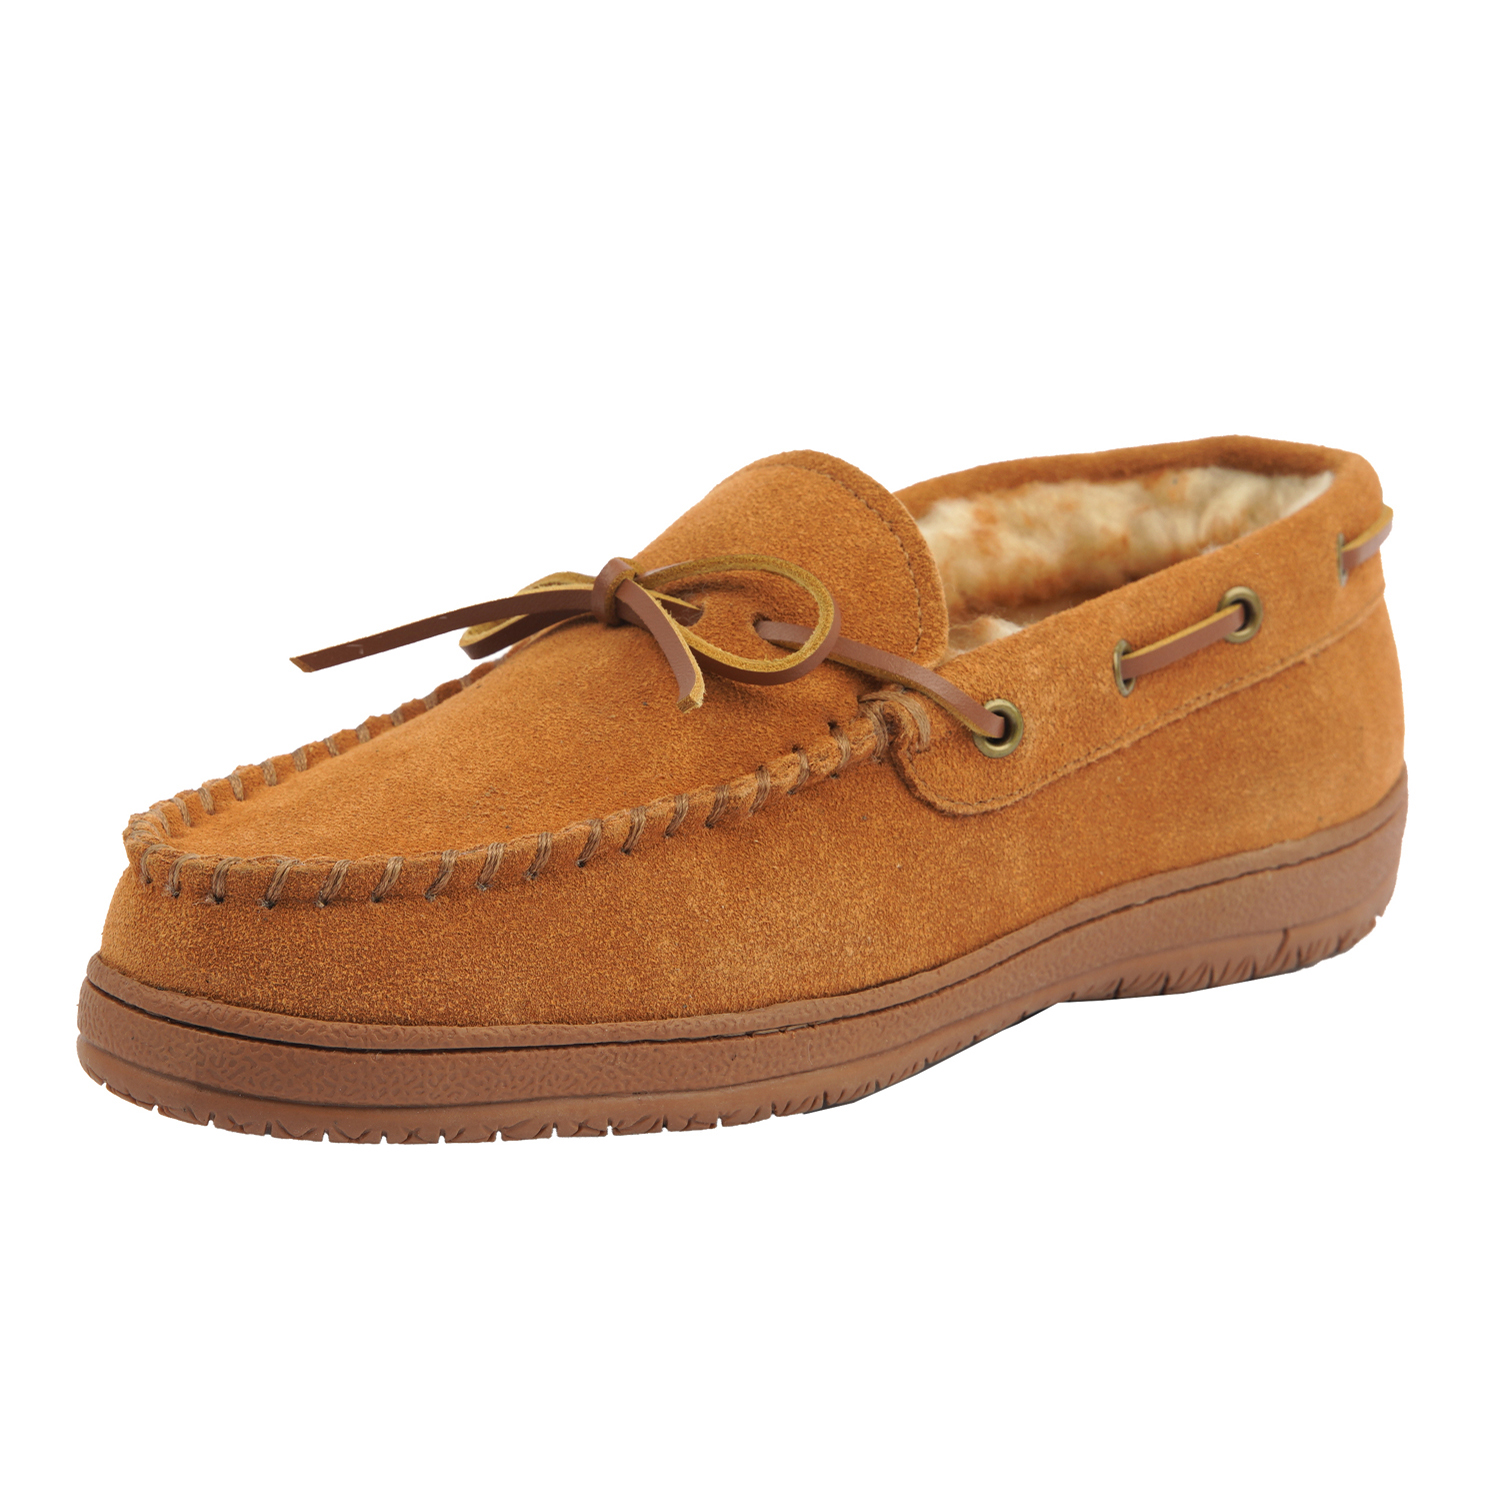  Men's Leather Lace-Up Moccasin Slippers